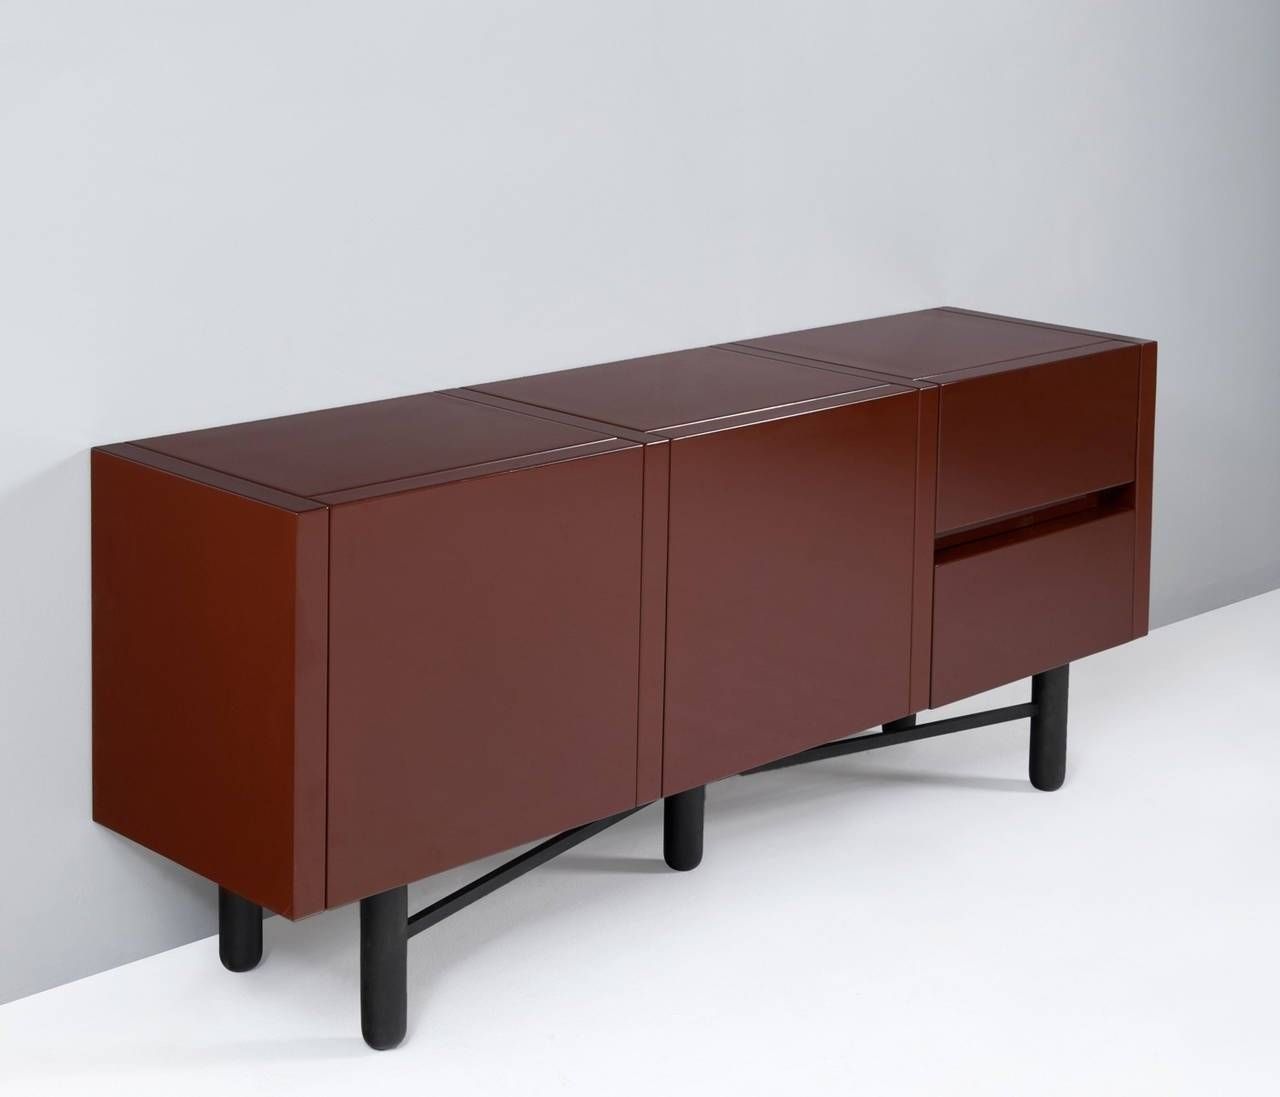 Roche Bobois Red Lacquered High Gloss Sideboard For Sale At 1stdibs Throughout Red High Gloss Sideboards (View 2 of 30)